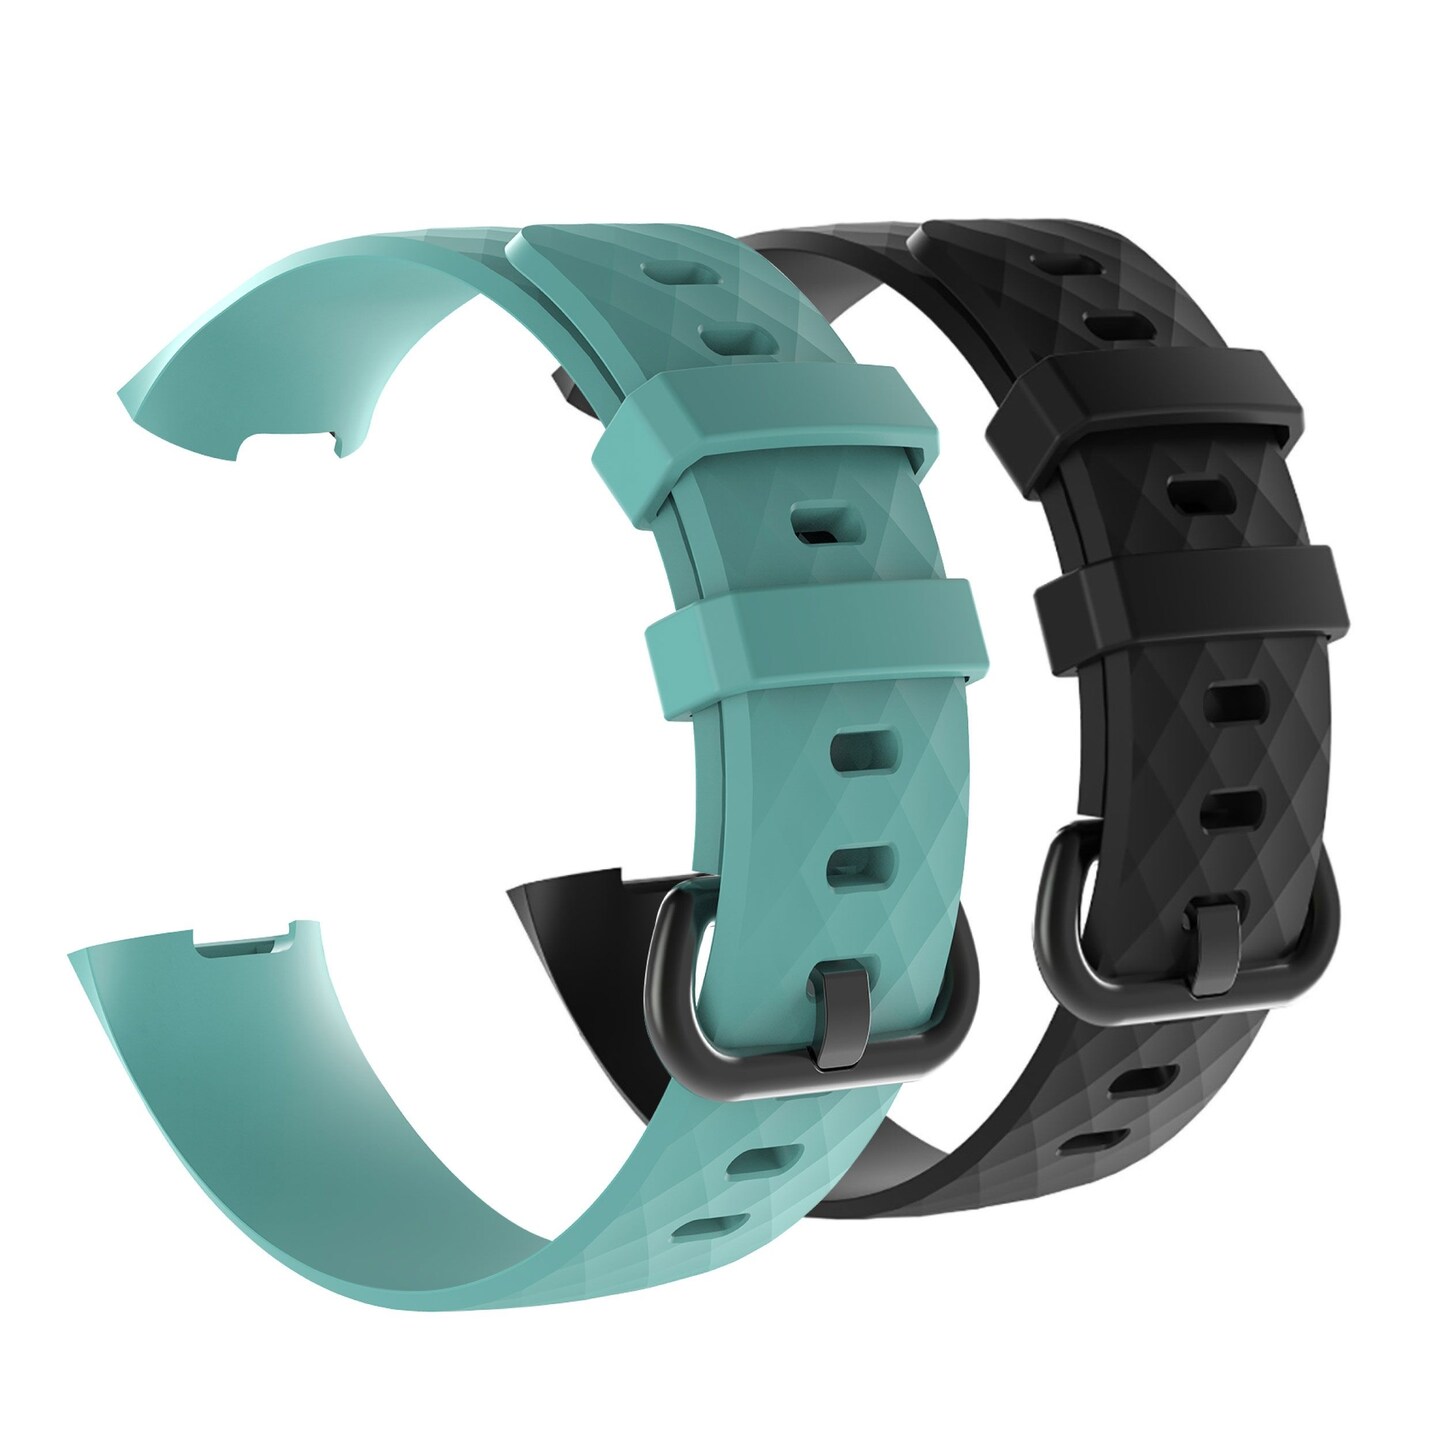 For Fitbit Charge 3 / 3 SE / 4 Bands, 2 Pack Replacement Strap for Women Men, Size Small, Black and Green